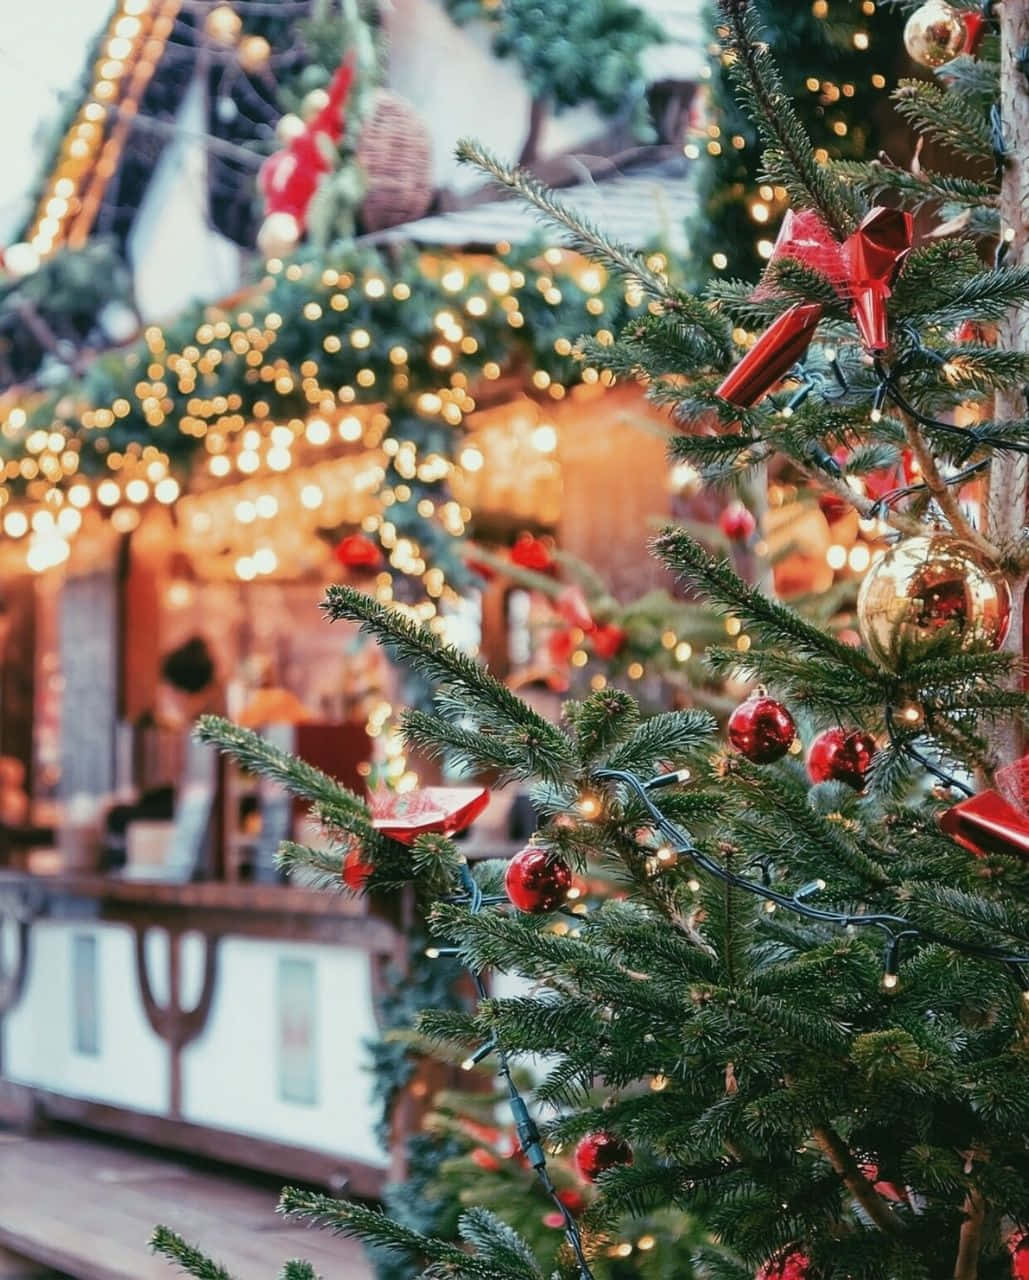 Spread holiday cheer with this festive winter Christmas aesthetic